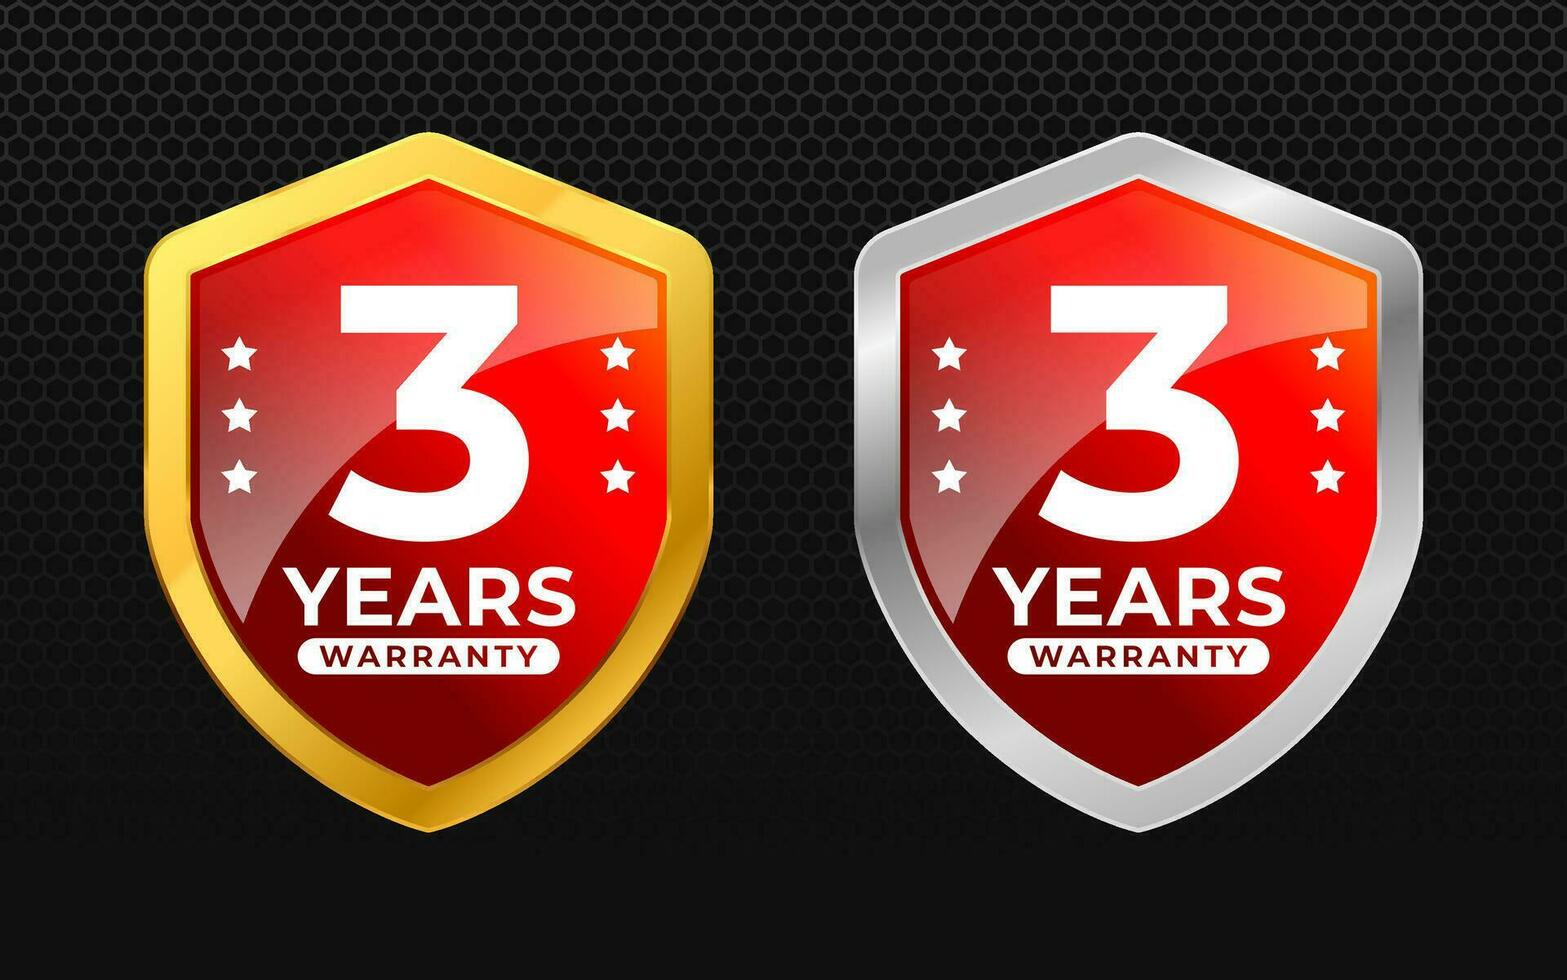 3 years warranty with glossy gold and silver vector shield shape. for label, seal, stamp, icon, logo, badge, symbol, sticker, button